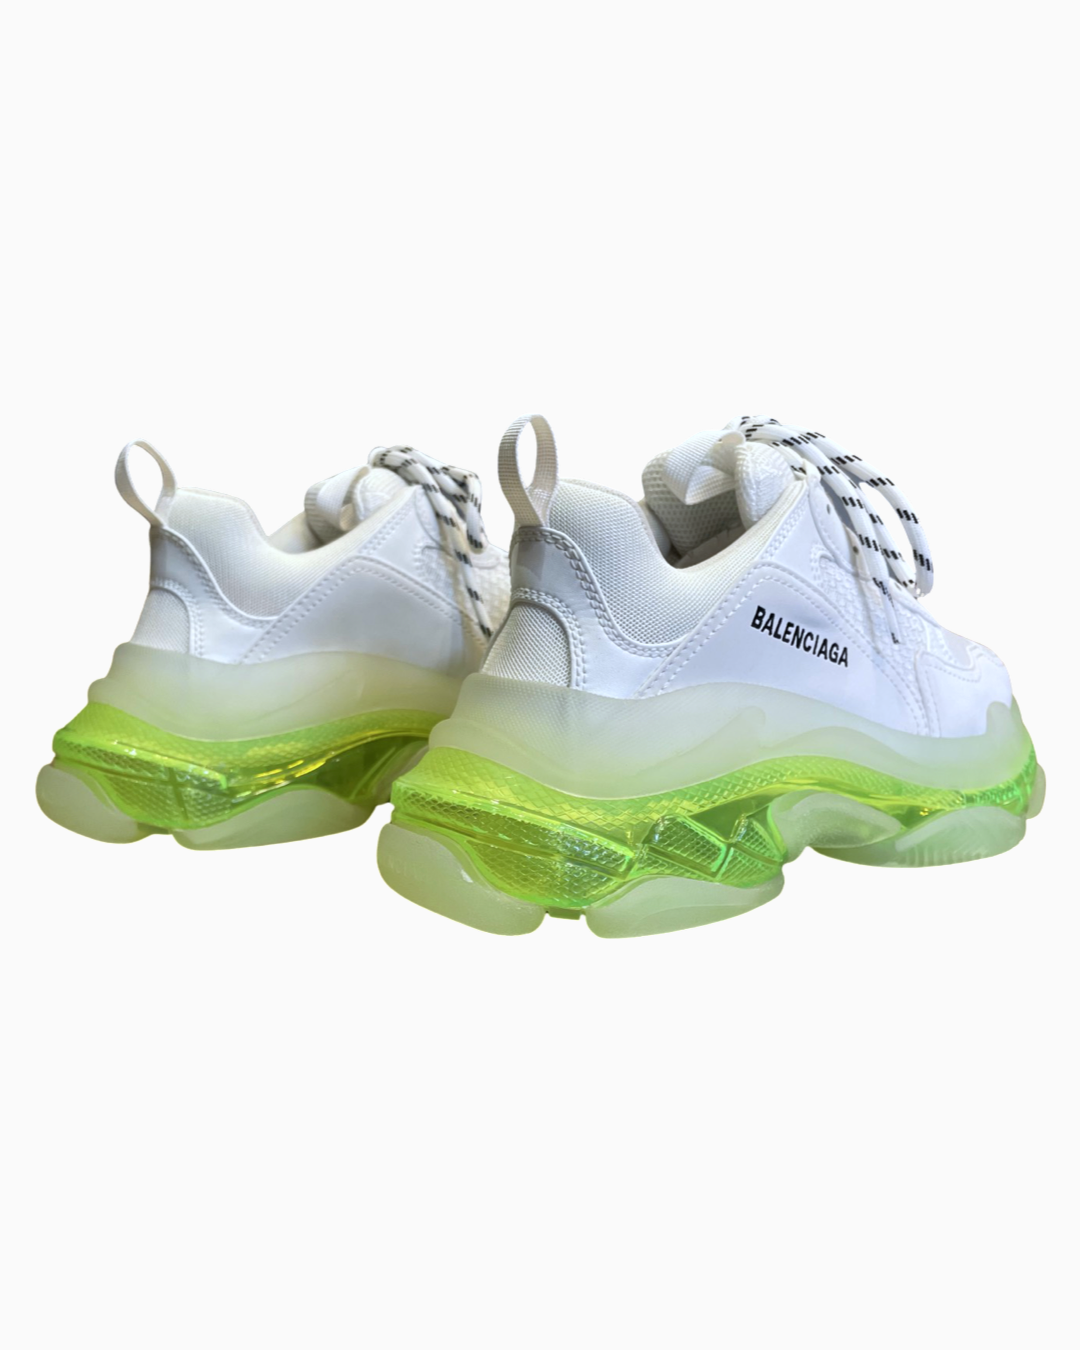 Balenciaga OffWhite Clear Sole Triple S Sneakers for Women